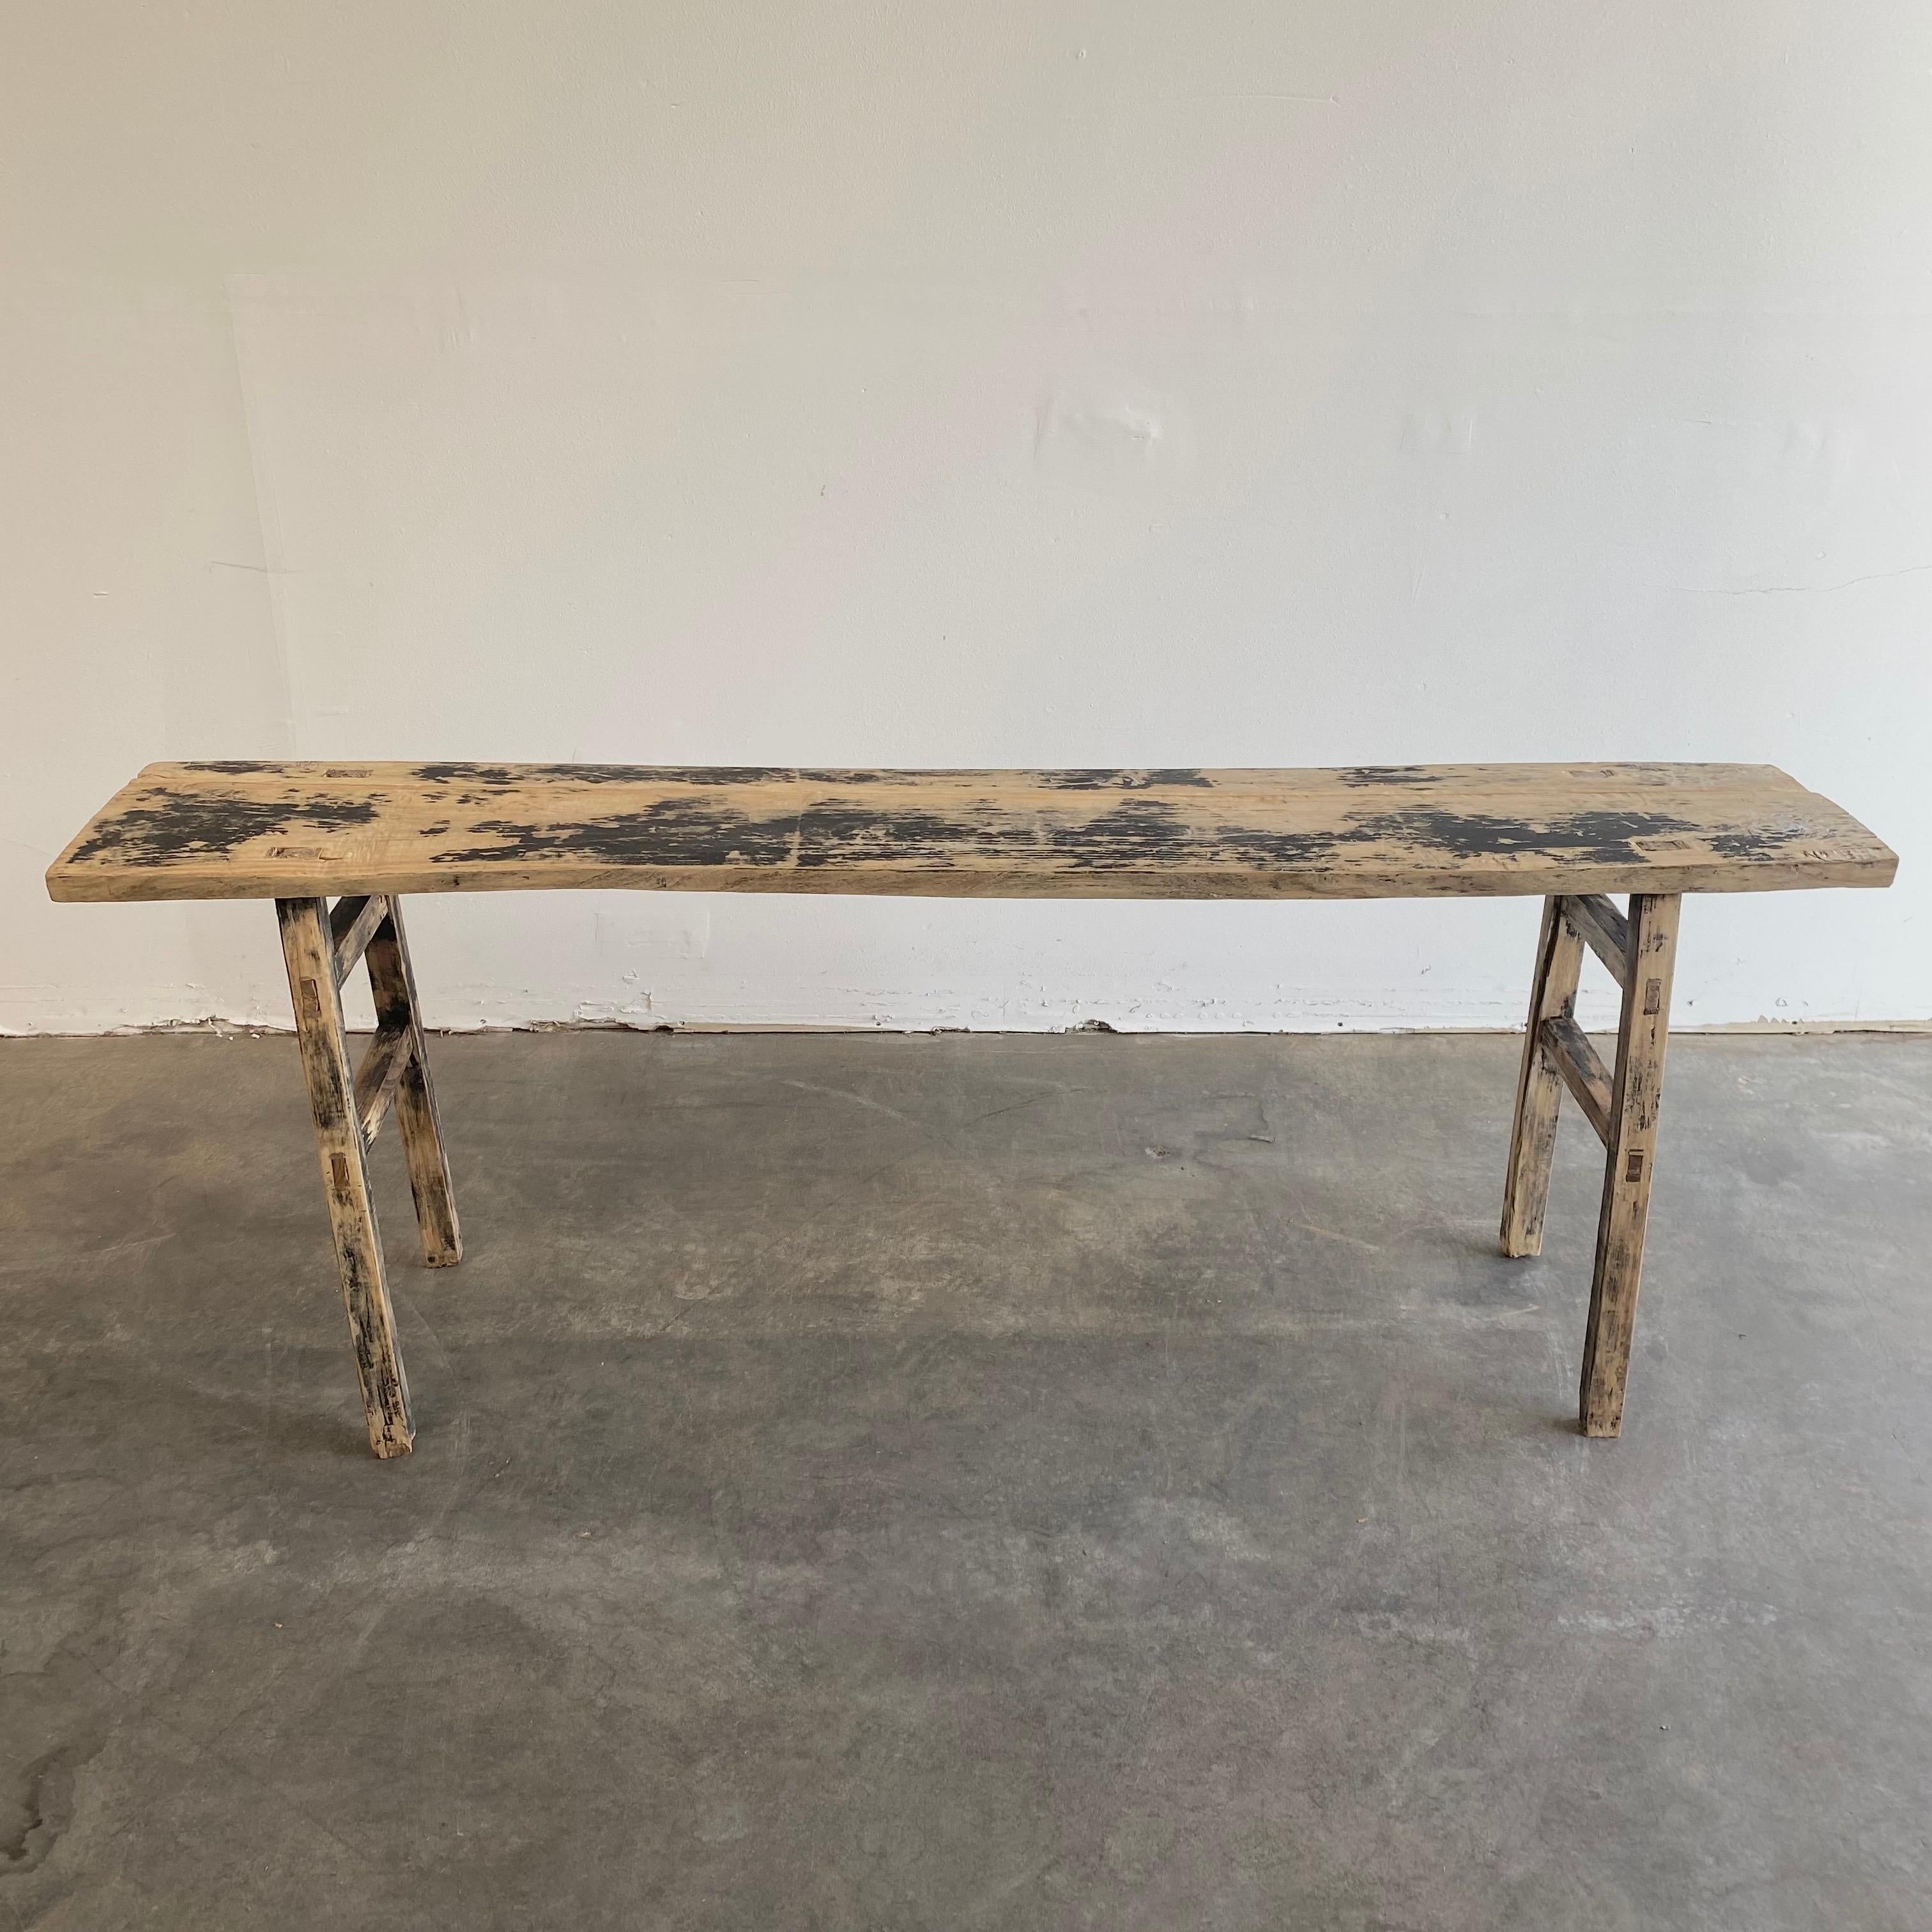 Vintage antique elm wood console table
Made from Vintage reclaimed elm wood. Beautiful antique patina, with weathering and age, these are solid and sturdy ready for daily use, use as a entry table, sofa table or console in a dining room. Great in a